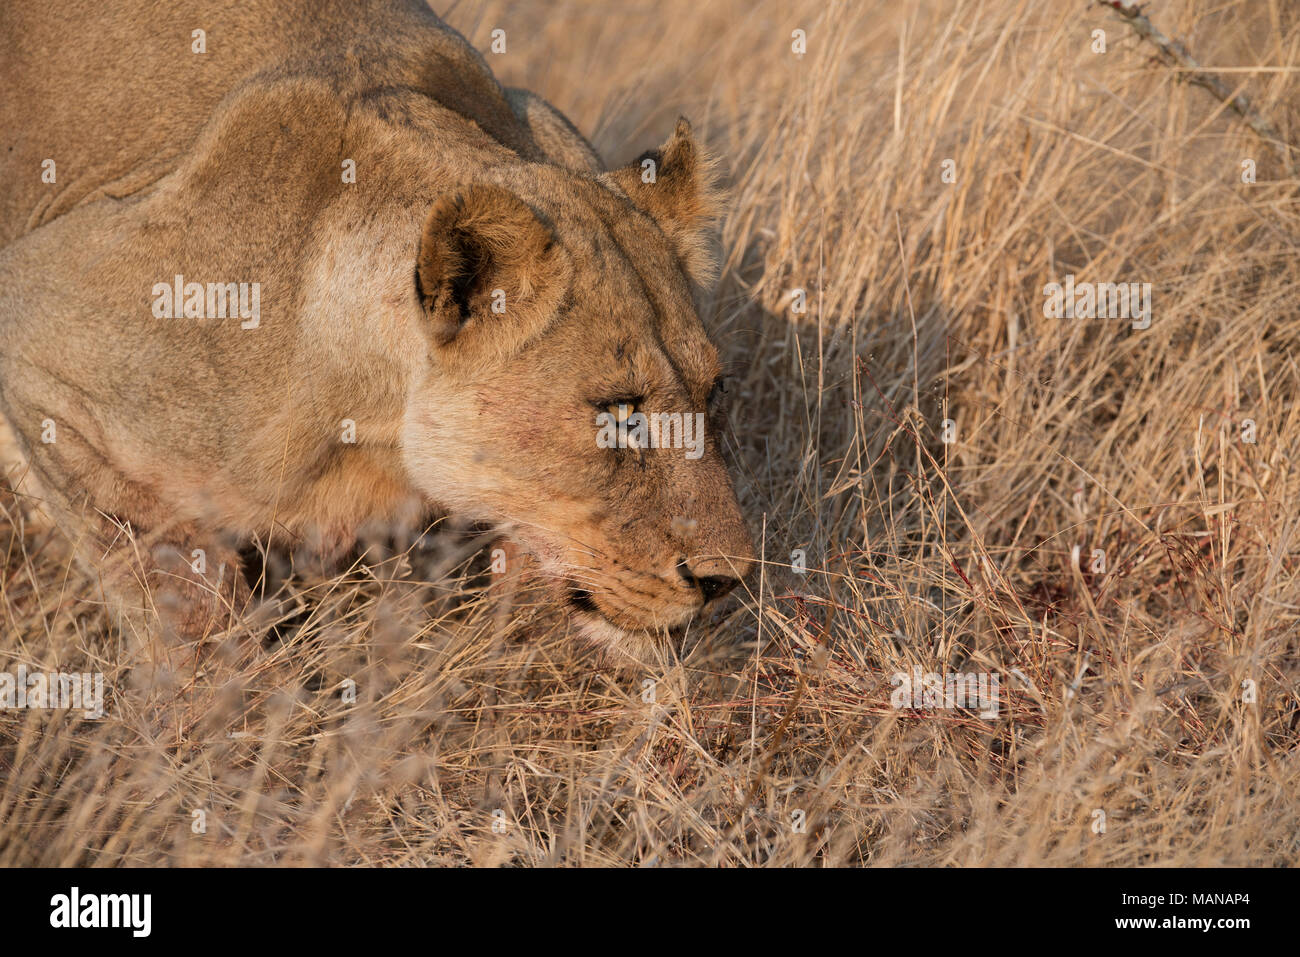 Lioness smelling some blood on grass Stock Photo